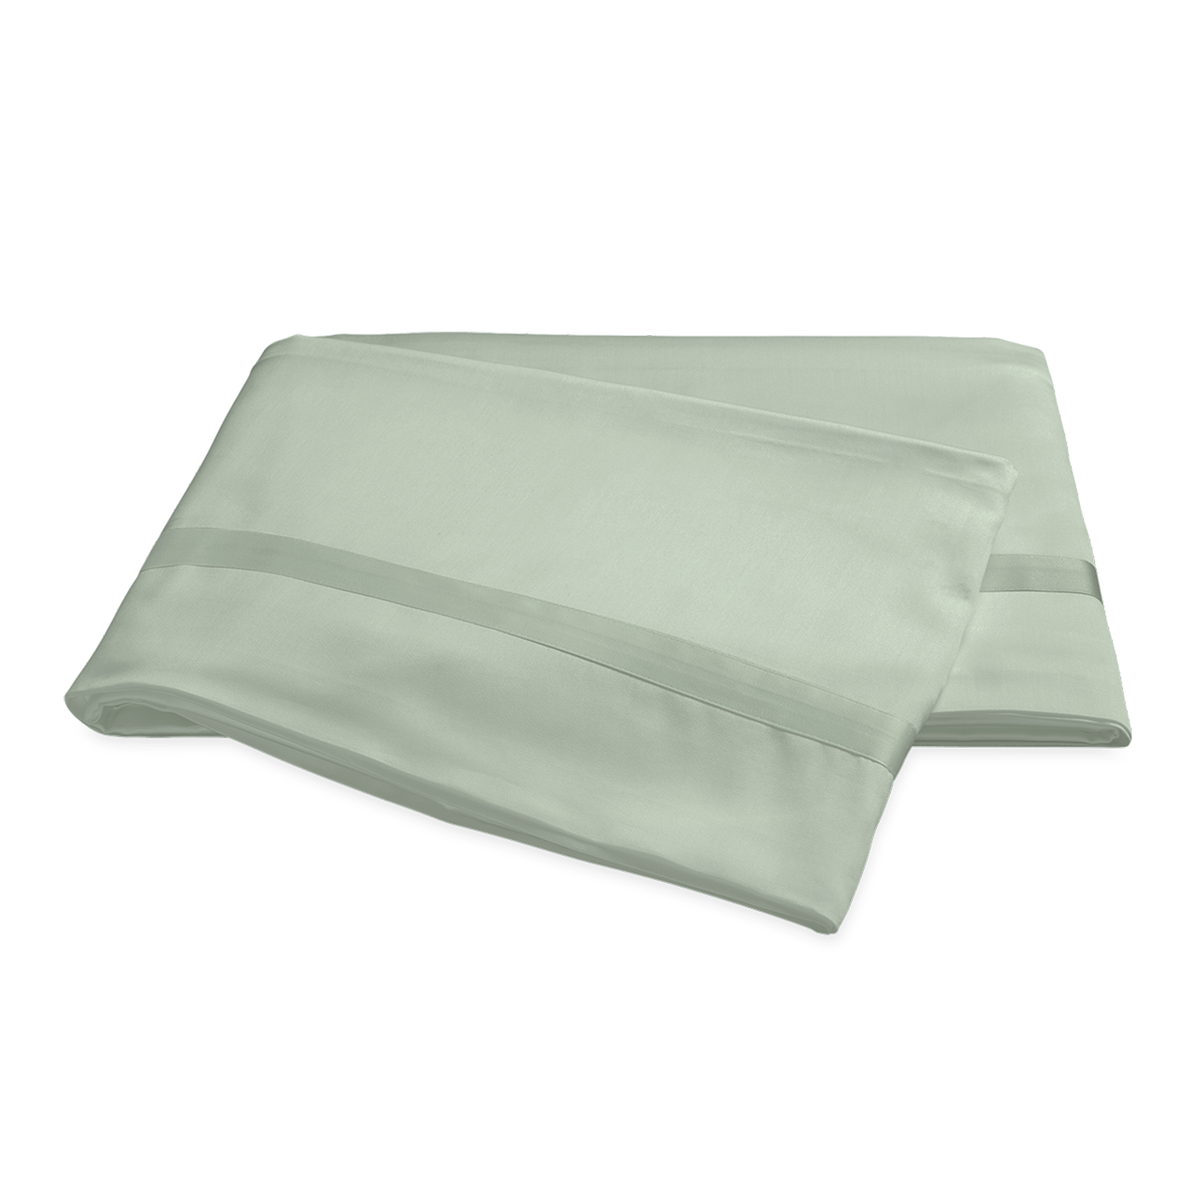 Flat Sheet of Matouk Nocturne Bedding Collection in Color Celadon